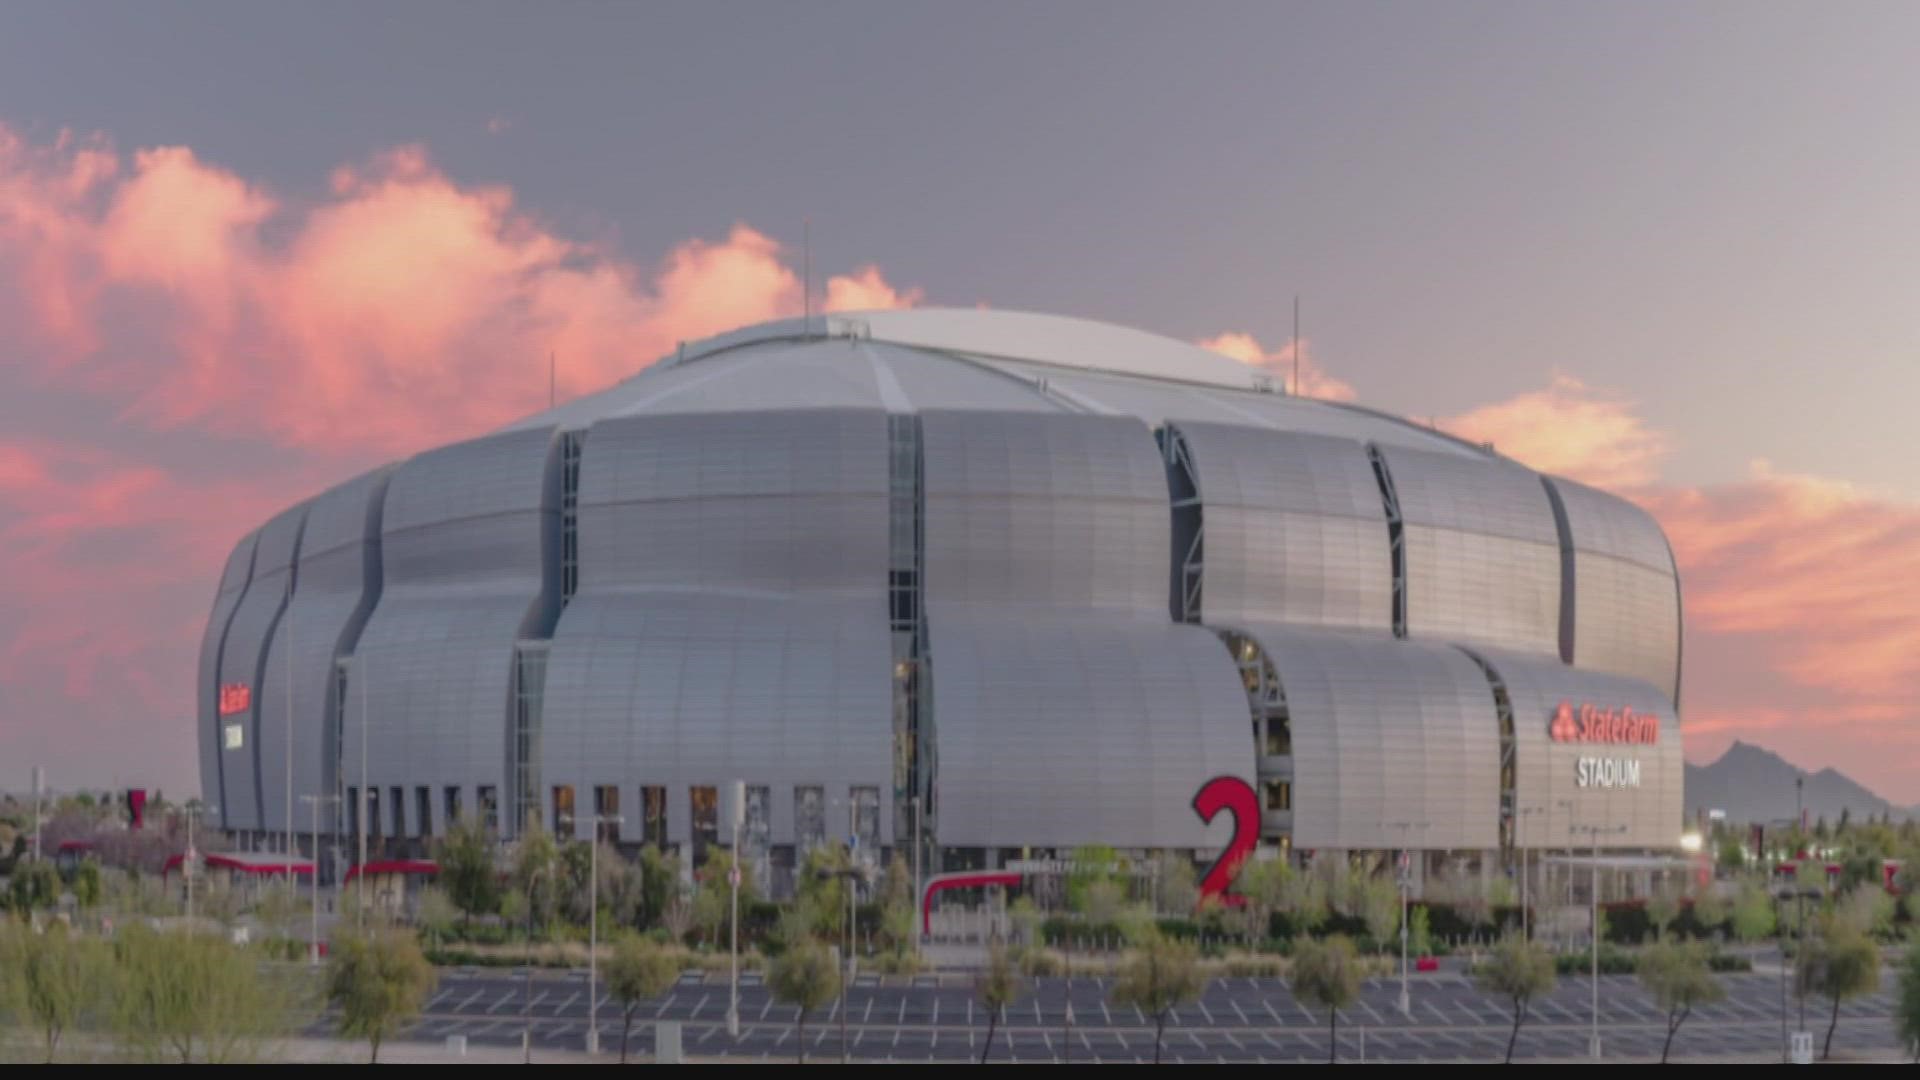 The Super Bowl host committee is giving us a taste of the 2023 Super Bowl plans. The committee announced there will be an outdoor festival leading up to the game.